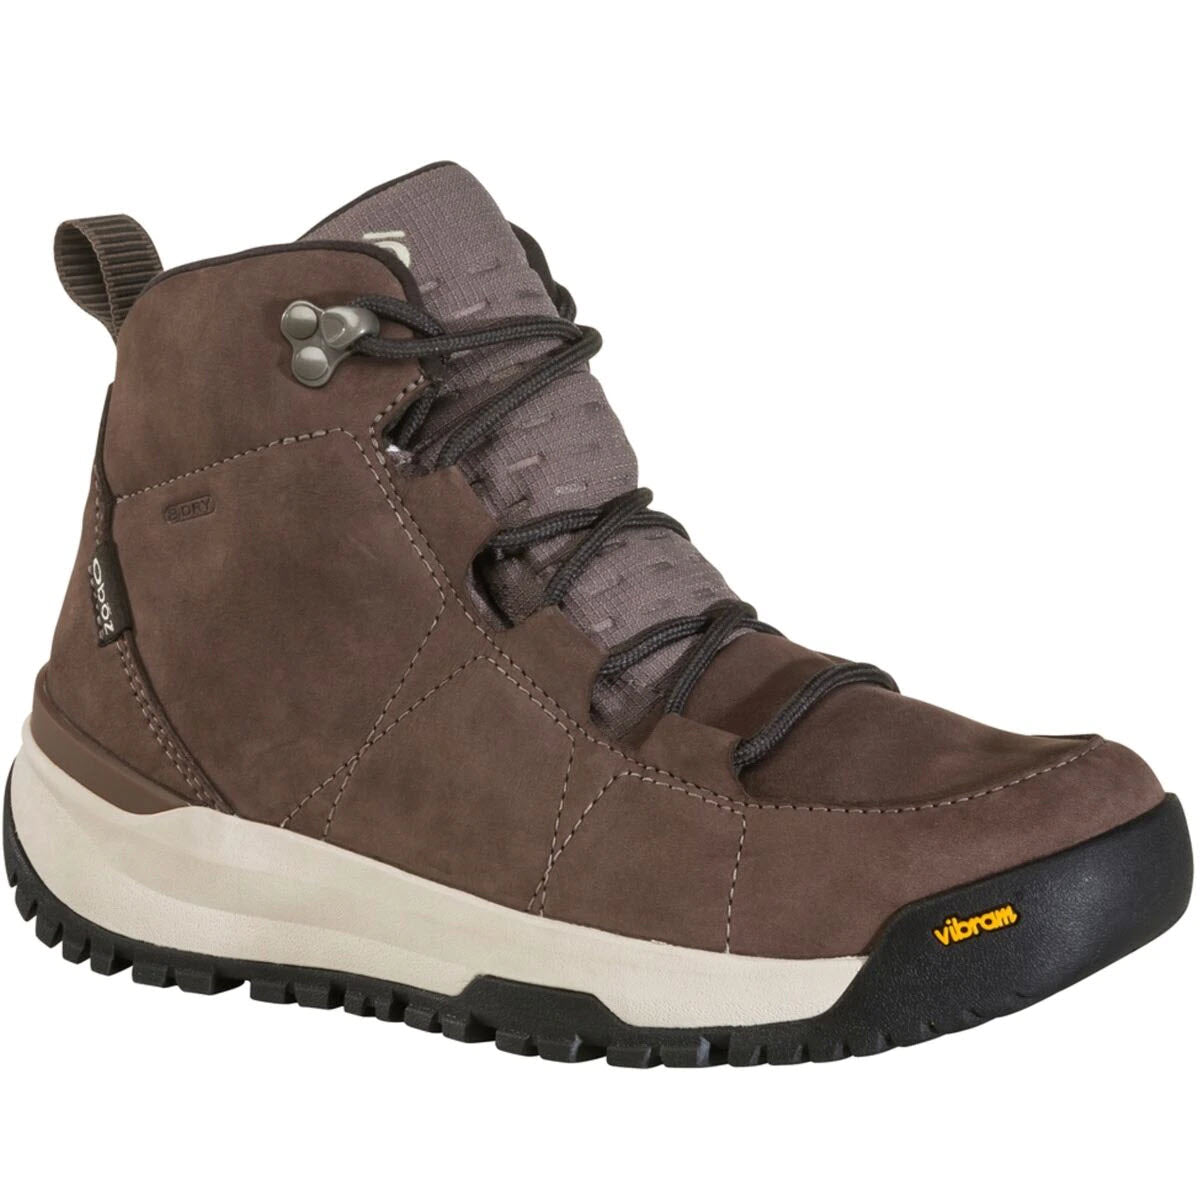 A brown Oboz Spinx Mid Insulated B-DRY Iced Coffee hiking boot with bungee lacing, a Vibram Arctic Grip A.T. sole, and a B-DRY waterproof membrane.